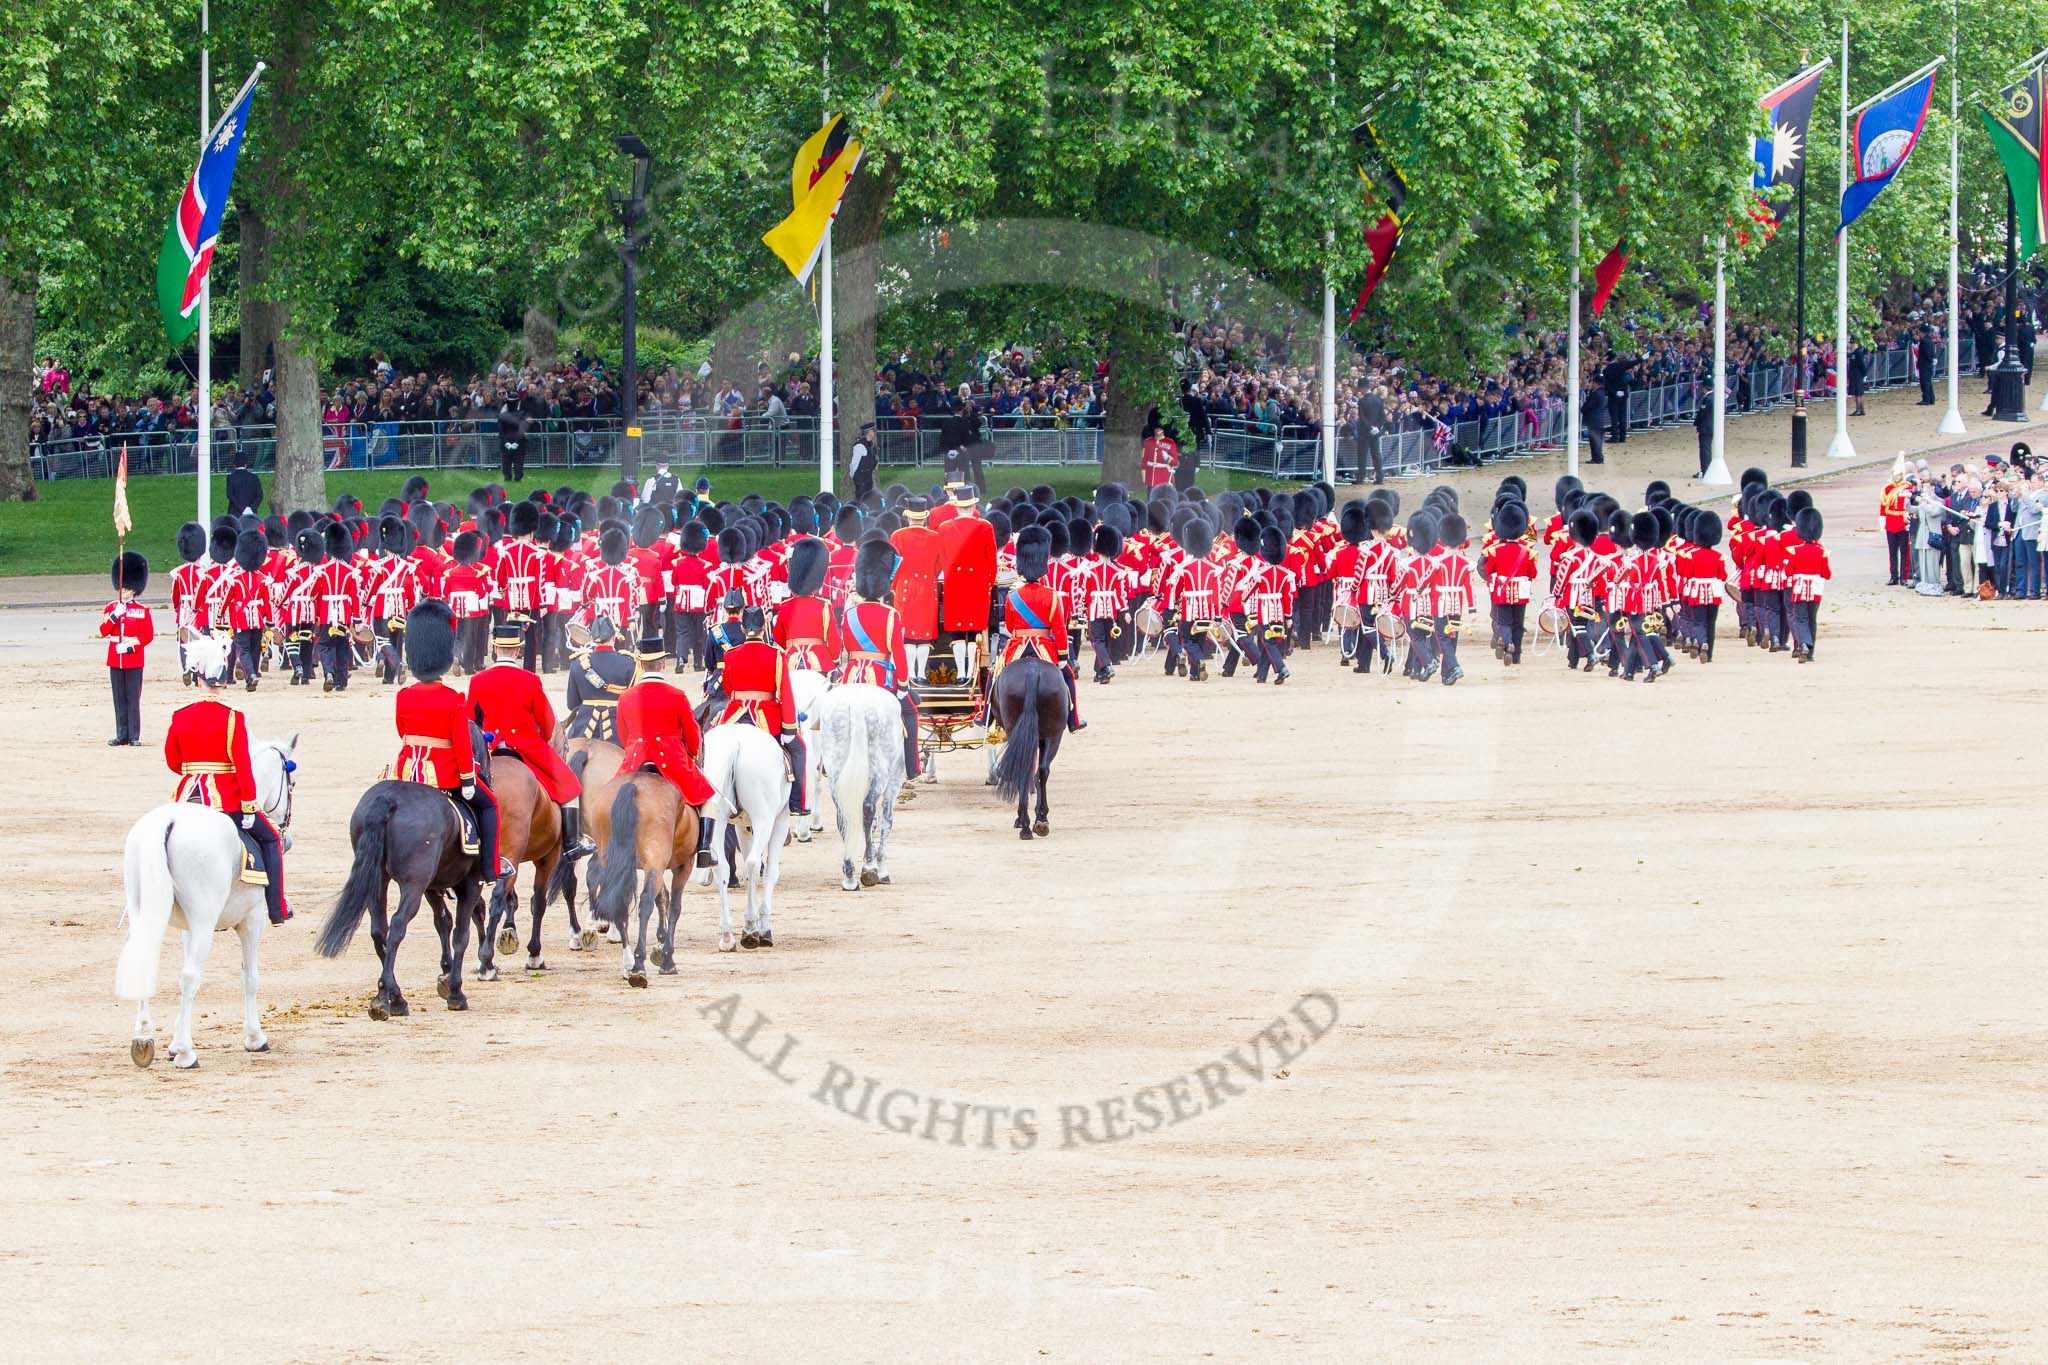 Trooping the Colour 2013: The March Off - the Massed Bands are leaving towards The Mall, followed by the glass coach carrying HM The Queen and HRH The Duke of Kent. Behind the glass coach the Royal Colonels. Image #835, 15 June 2013 12:12 Horse Guards Parade, London, UK